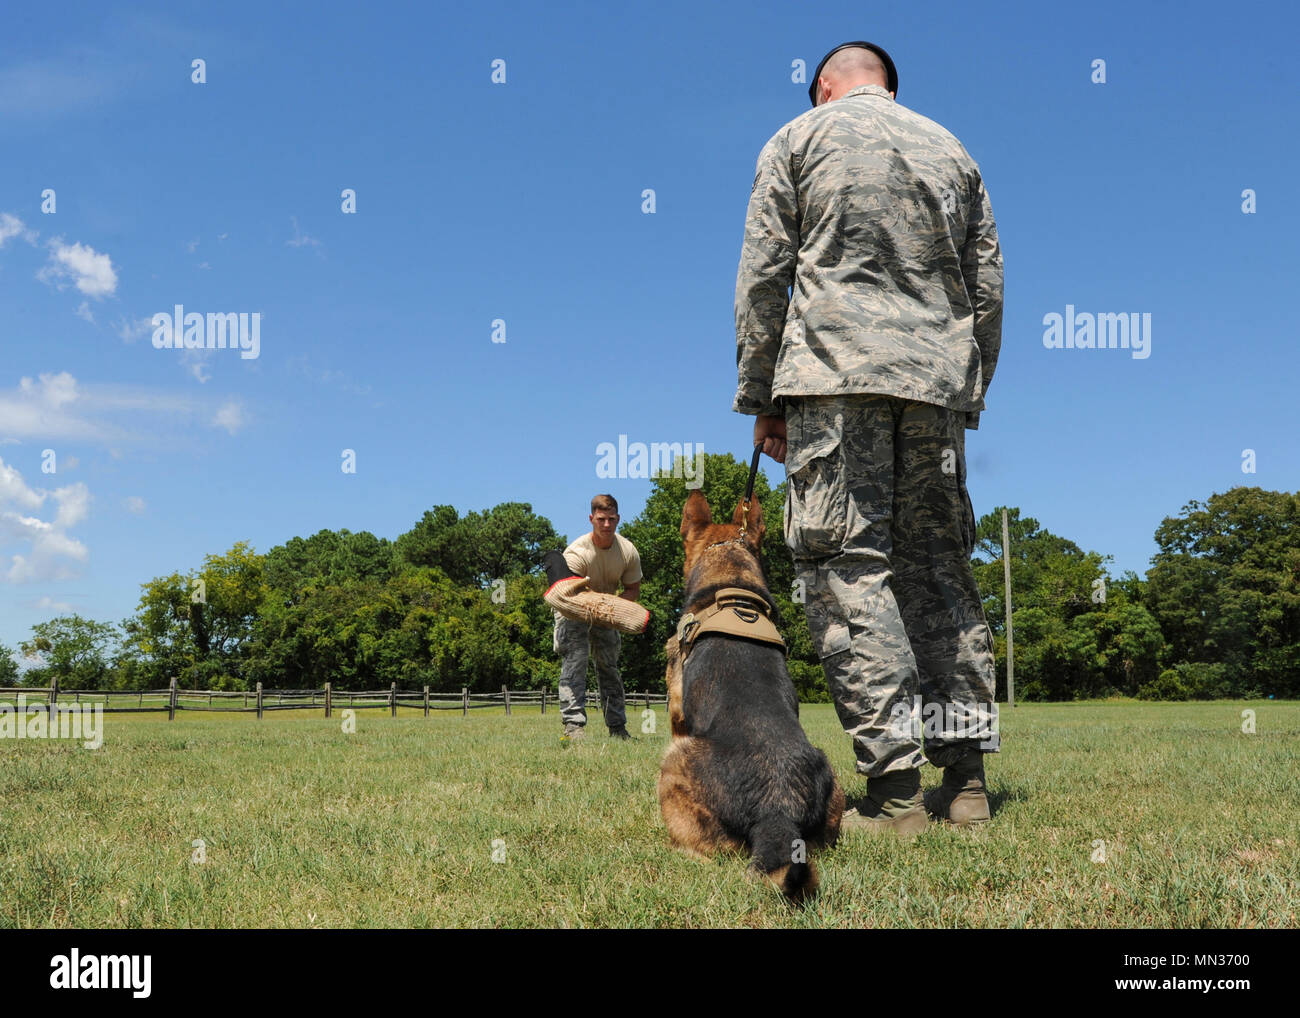 U.S. Air Force Staff Sgt. Jeffrie Kennedy, 633rd Security Forces Squadron military working dog handler prepares to instruct his partner, Toni, 633rd SFS MWD, at Joint Base Langley-Eustis, Va., Aug. 4, 2017. On a daily basis, Kennedy and Toni work together to keep JBLE safe. Their hard work and dedication led them to place first in the “Iron Dawg” competition hosted by Naval Air Station Oceana, Va., July 31, 2017. (U.S. Air Force photo/Airman 1st Class Anthony Nin Leclerec) Stock Photo